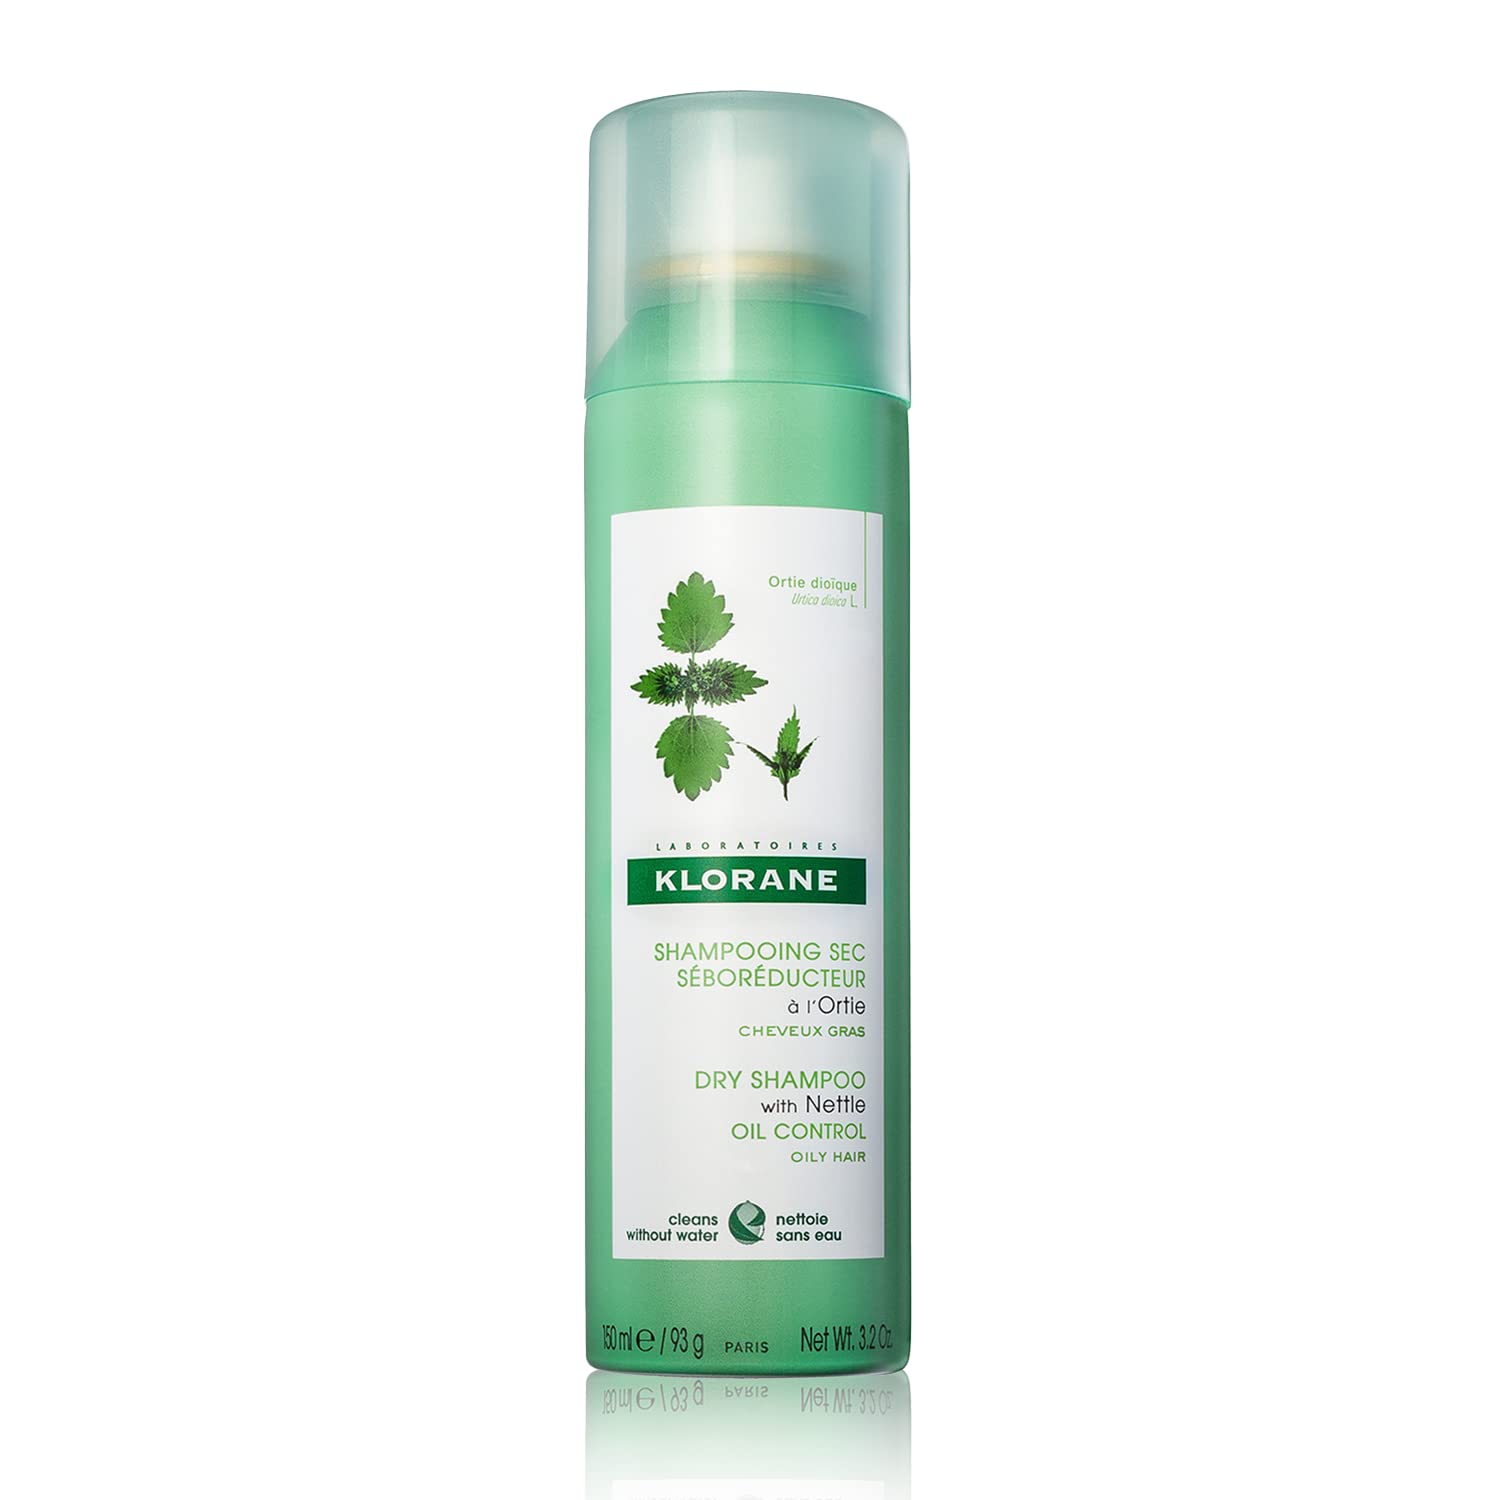 Klorane Dry Shampoo with Nettle for Oily Hair and Scalp, Regulates Oil Production, Paraben & Sulfate-Free